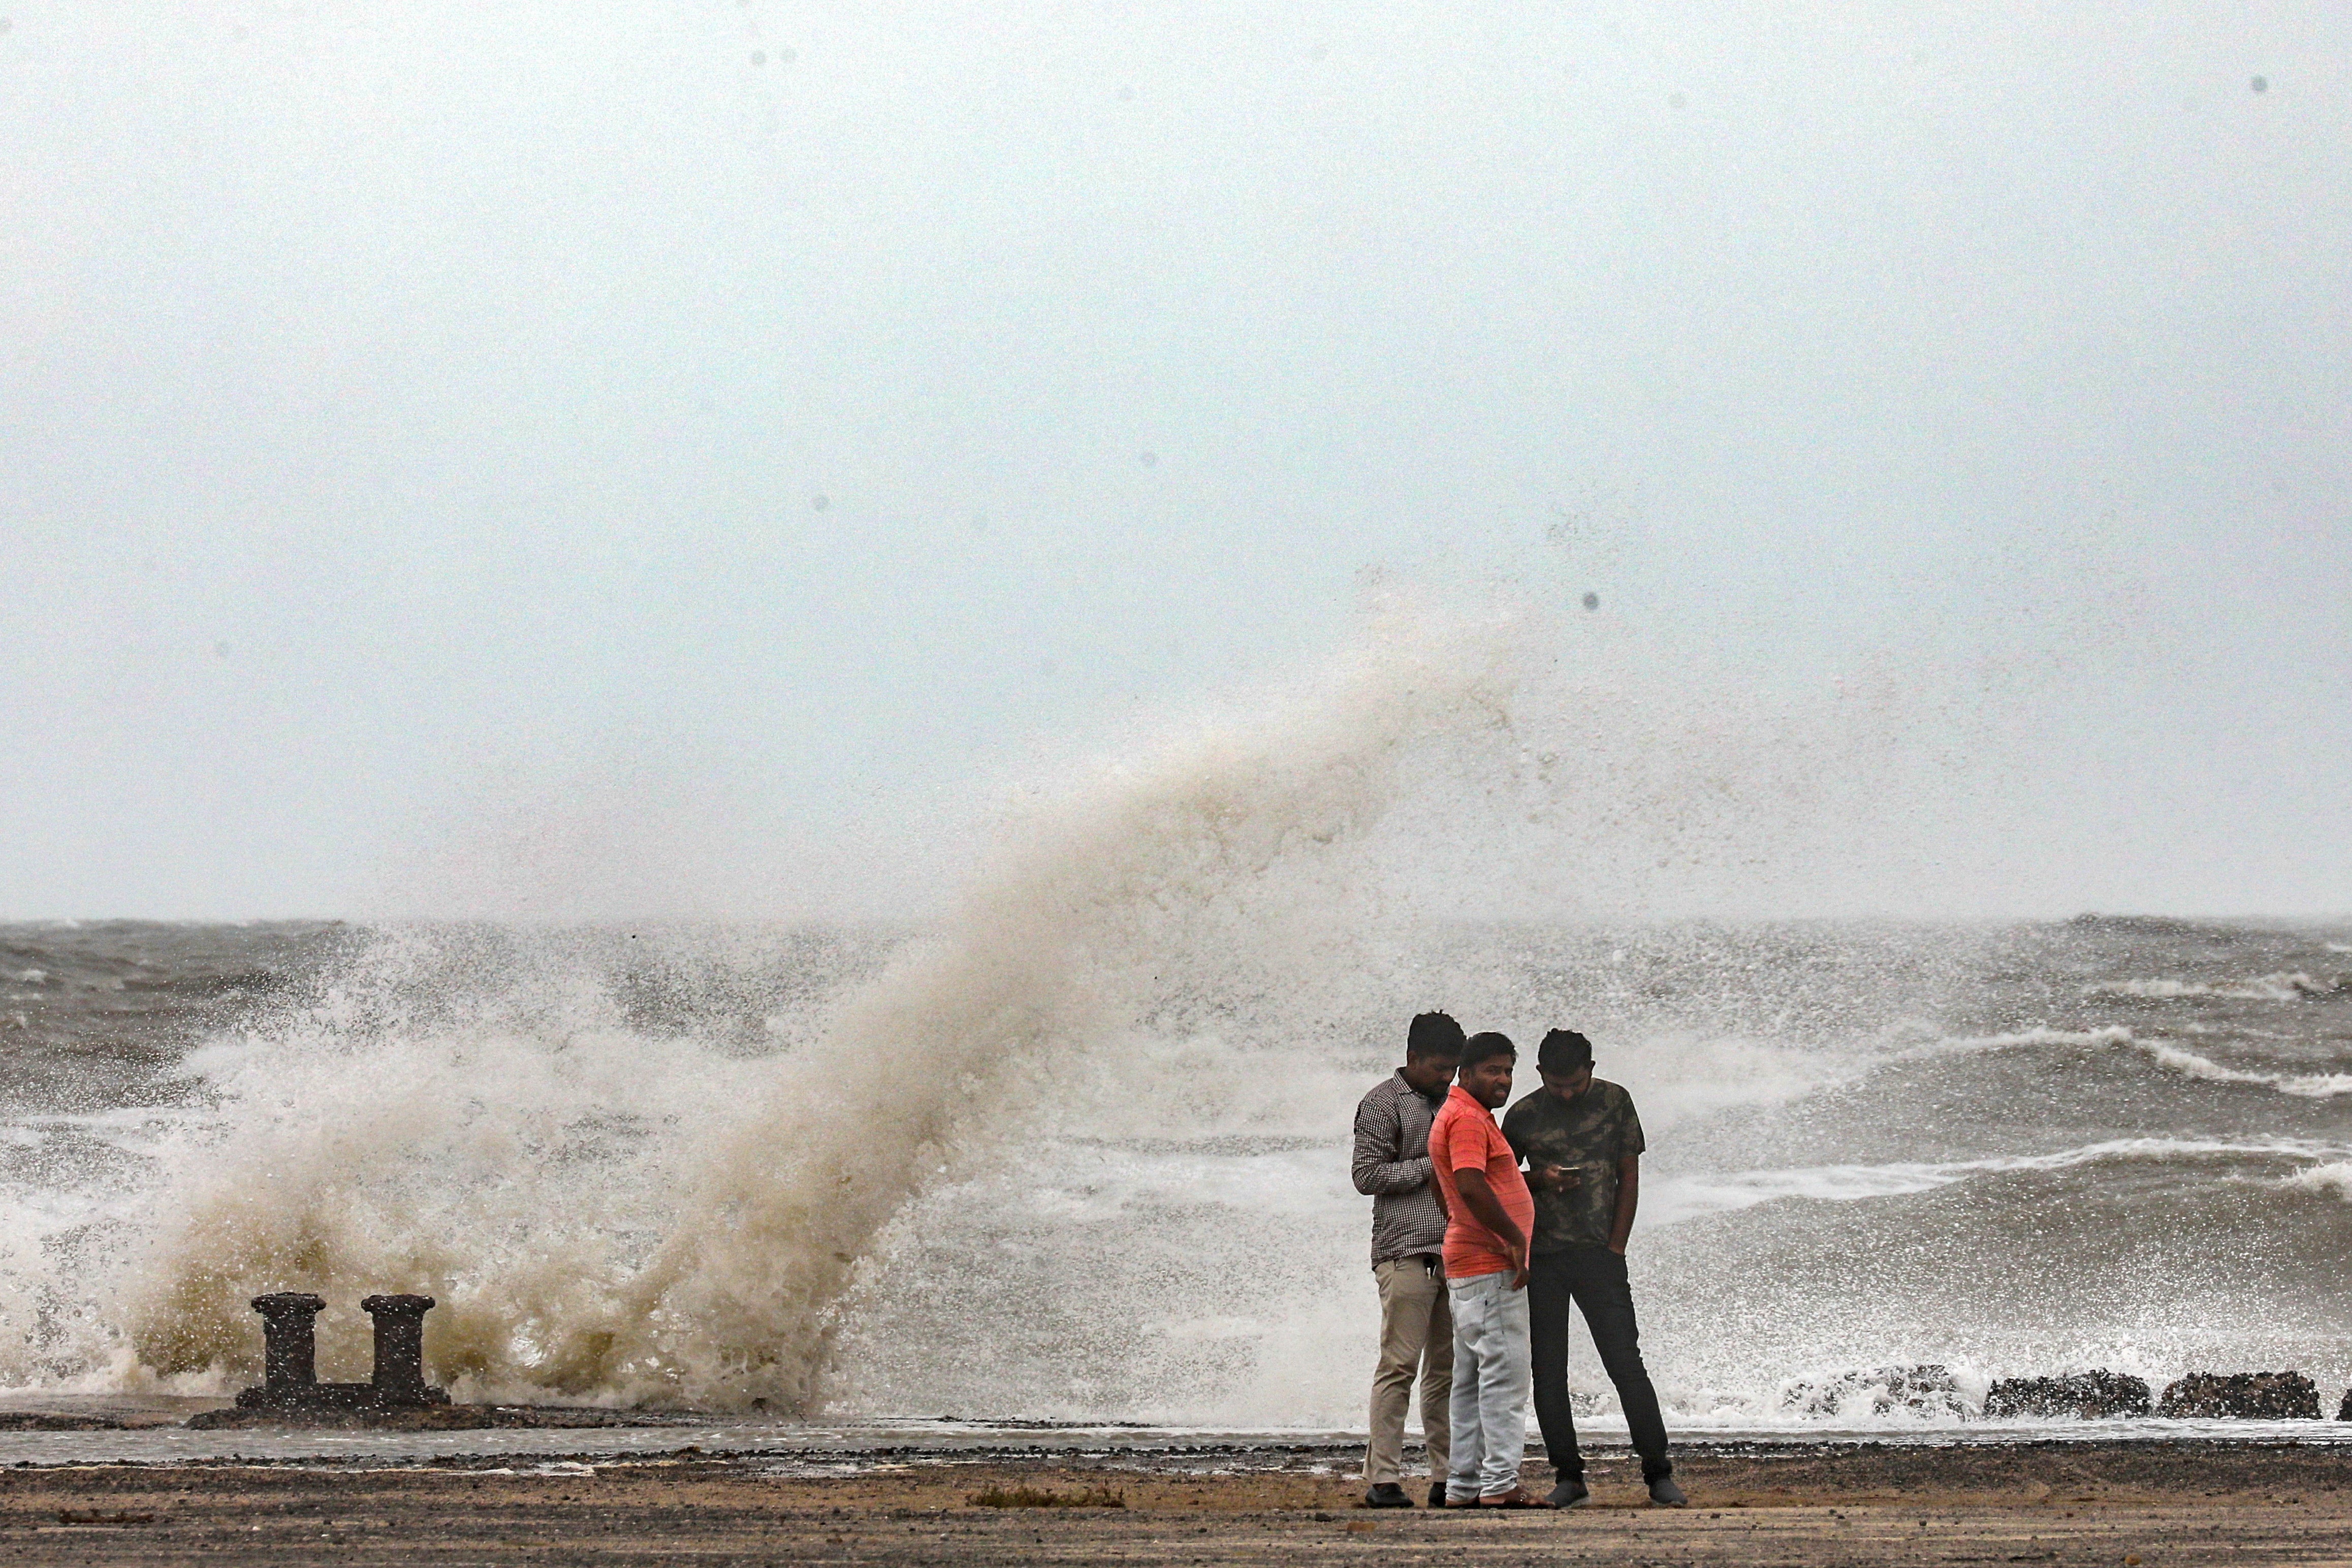 People stand near the coast during high tide in Mandvi, in the Kutch district of the western state of Gujarat, India